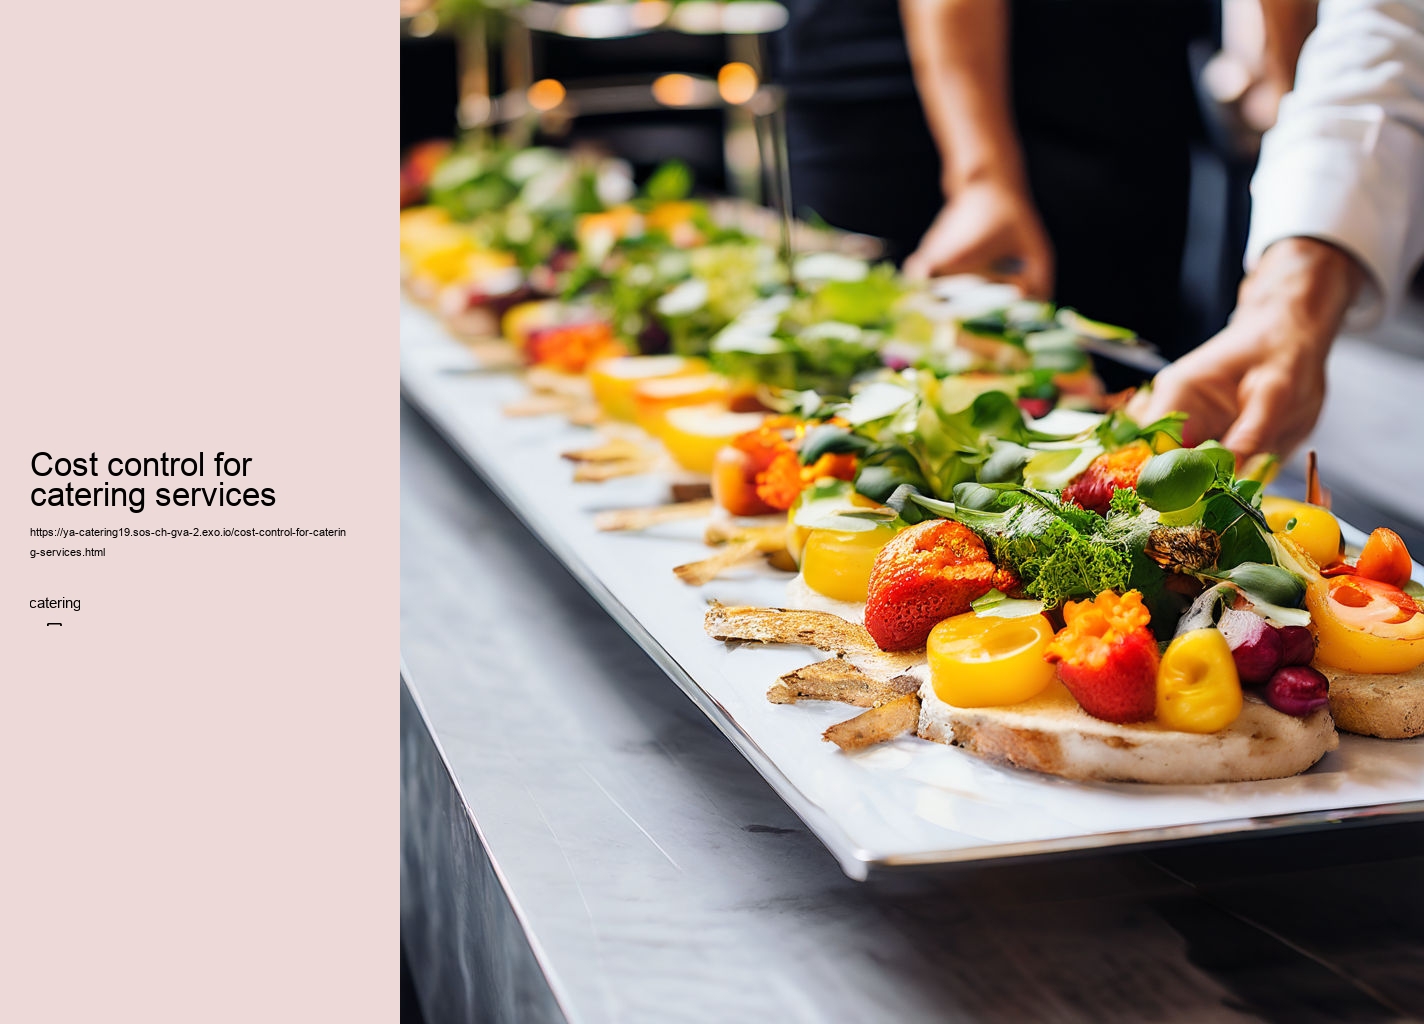 Cost control for catering services